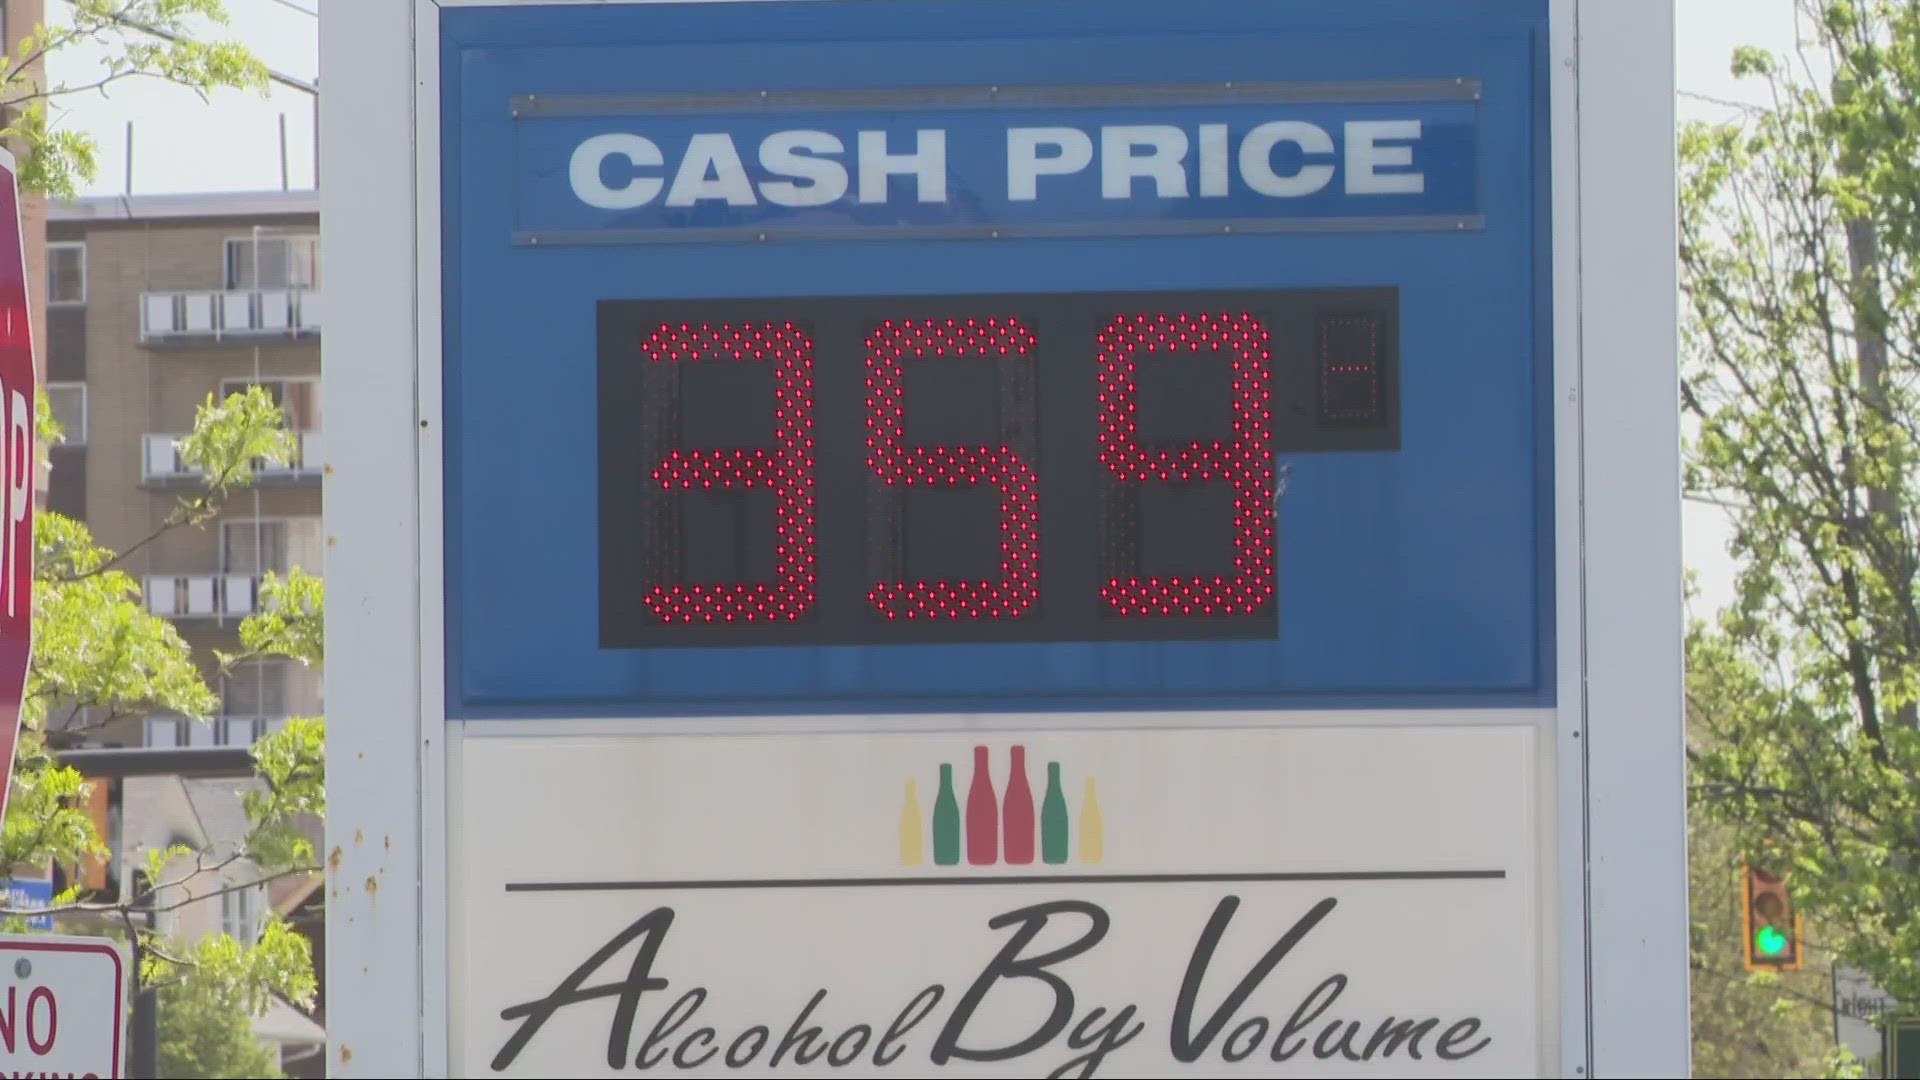 The average price for a gallon of gas now stands near $3.60 in Cleveland and Akron.